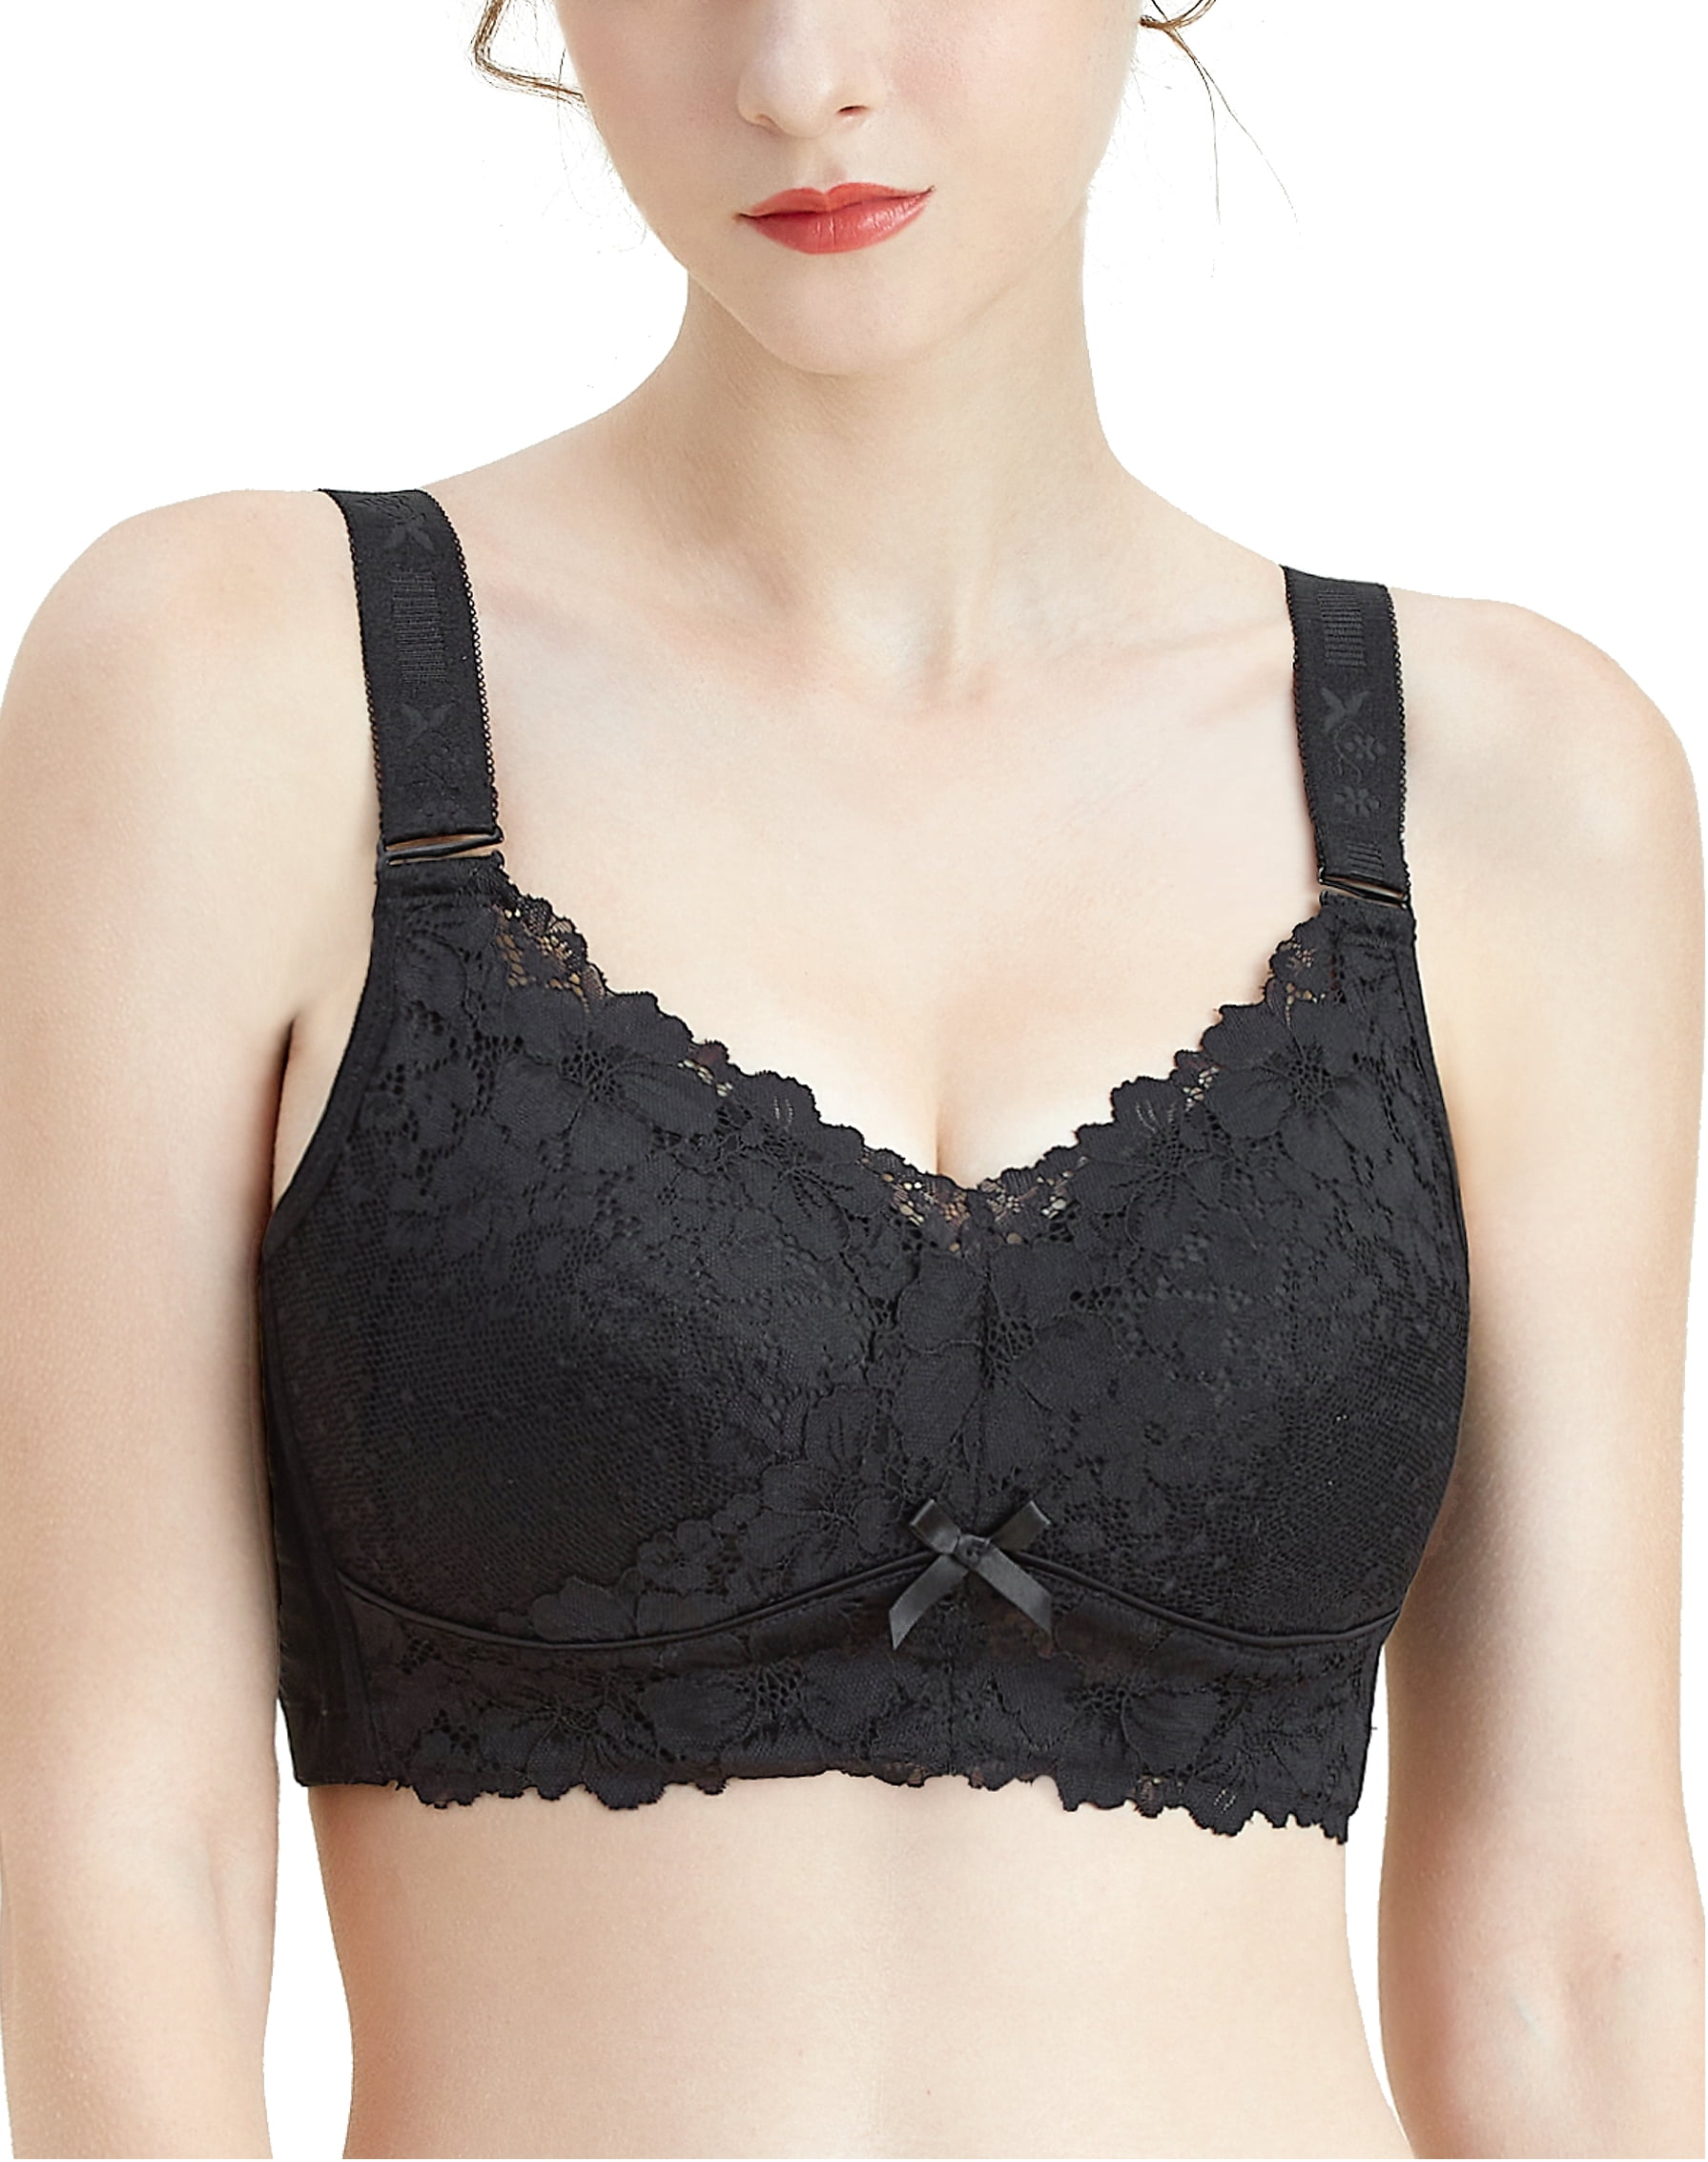 Women Daily Wireless Bra Wire Free Bra with Support Full-Coverage